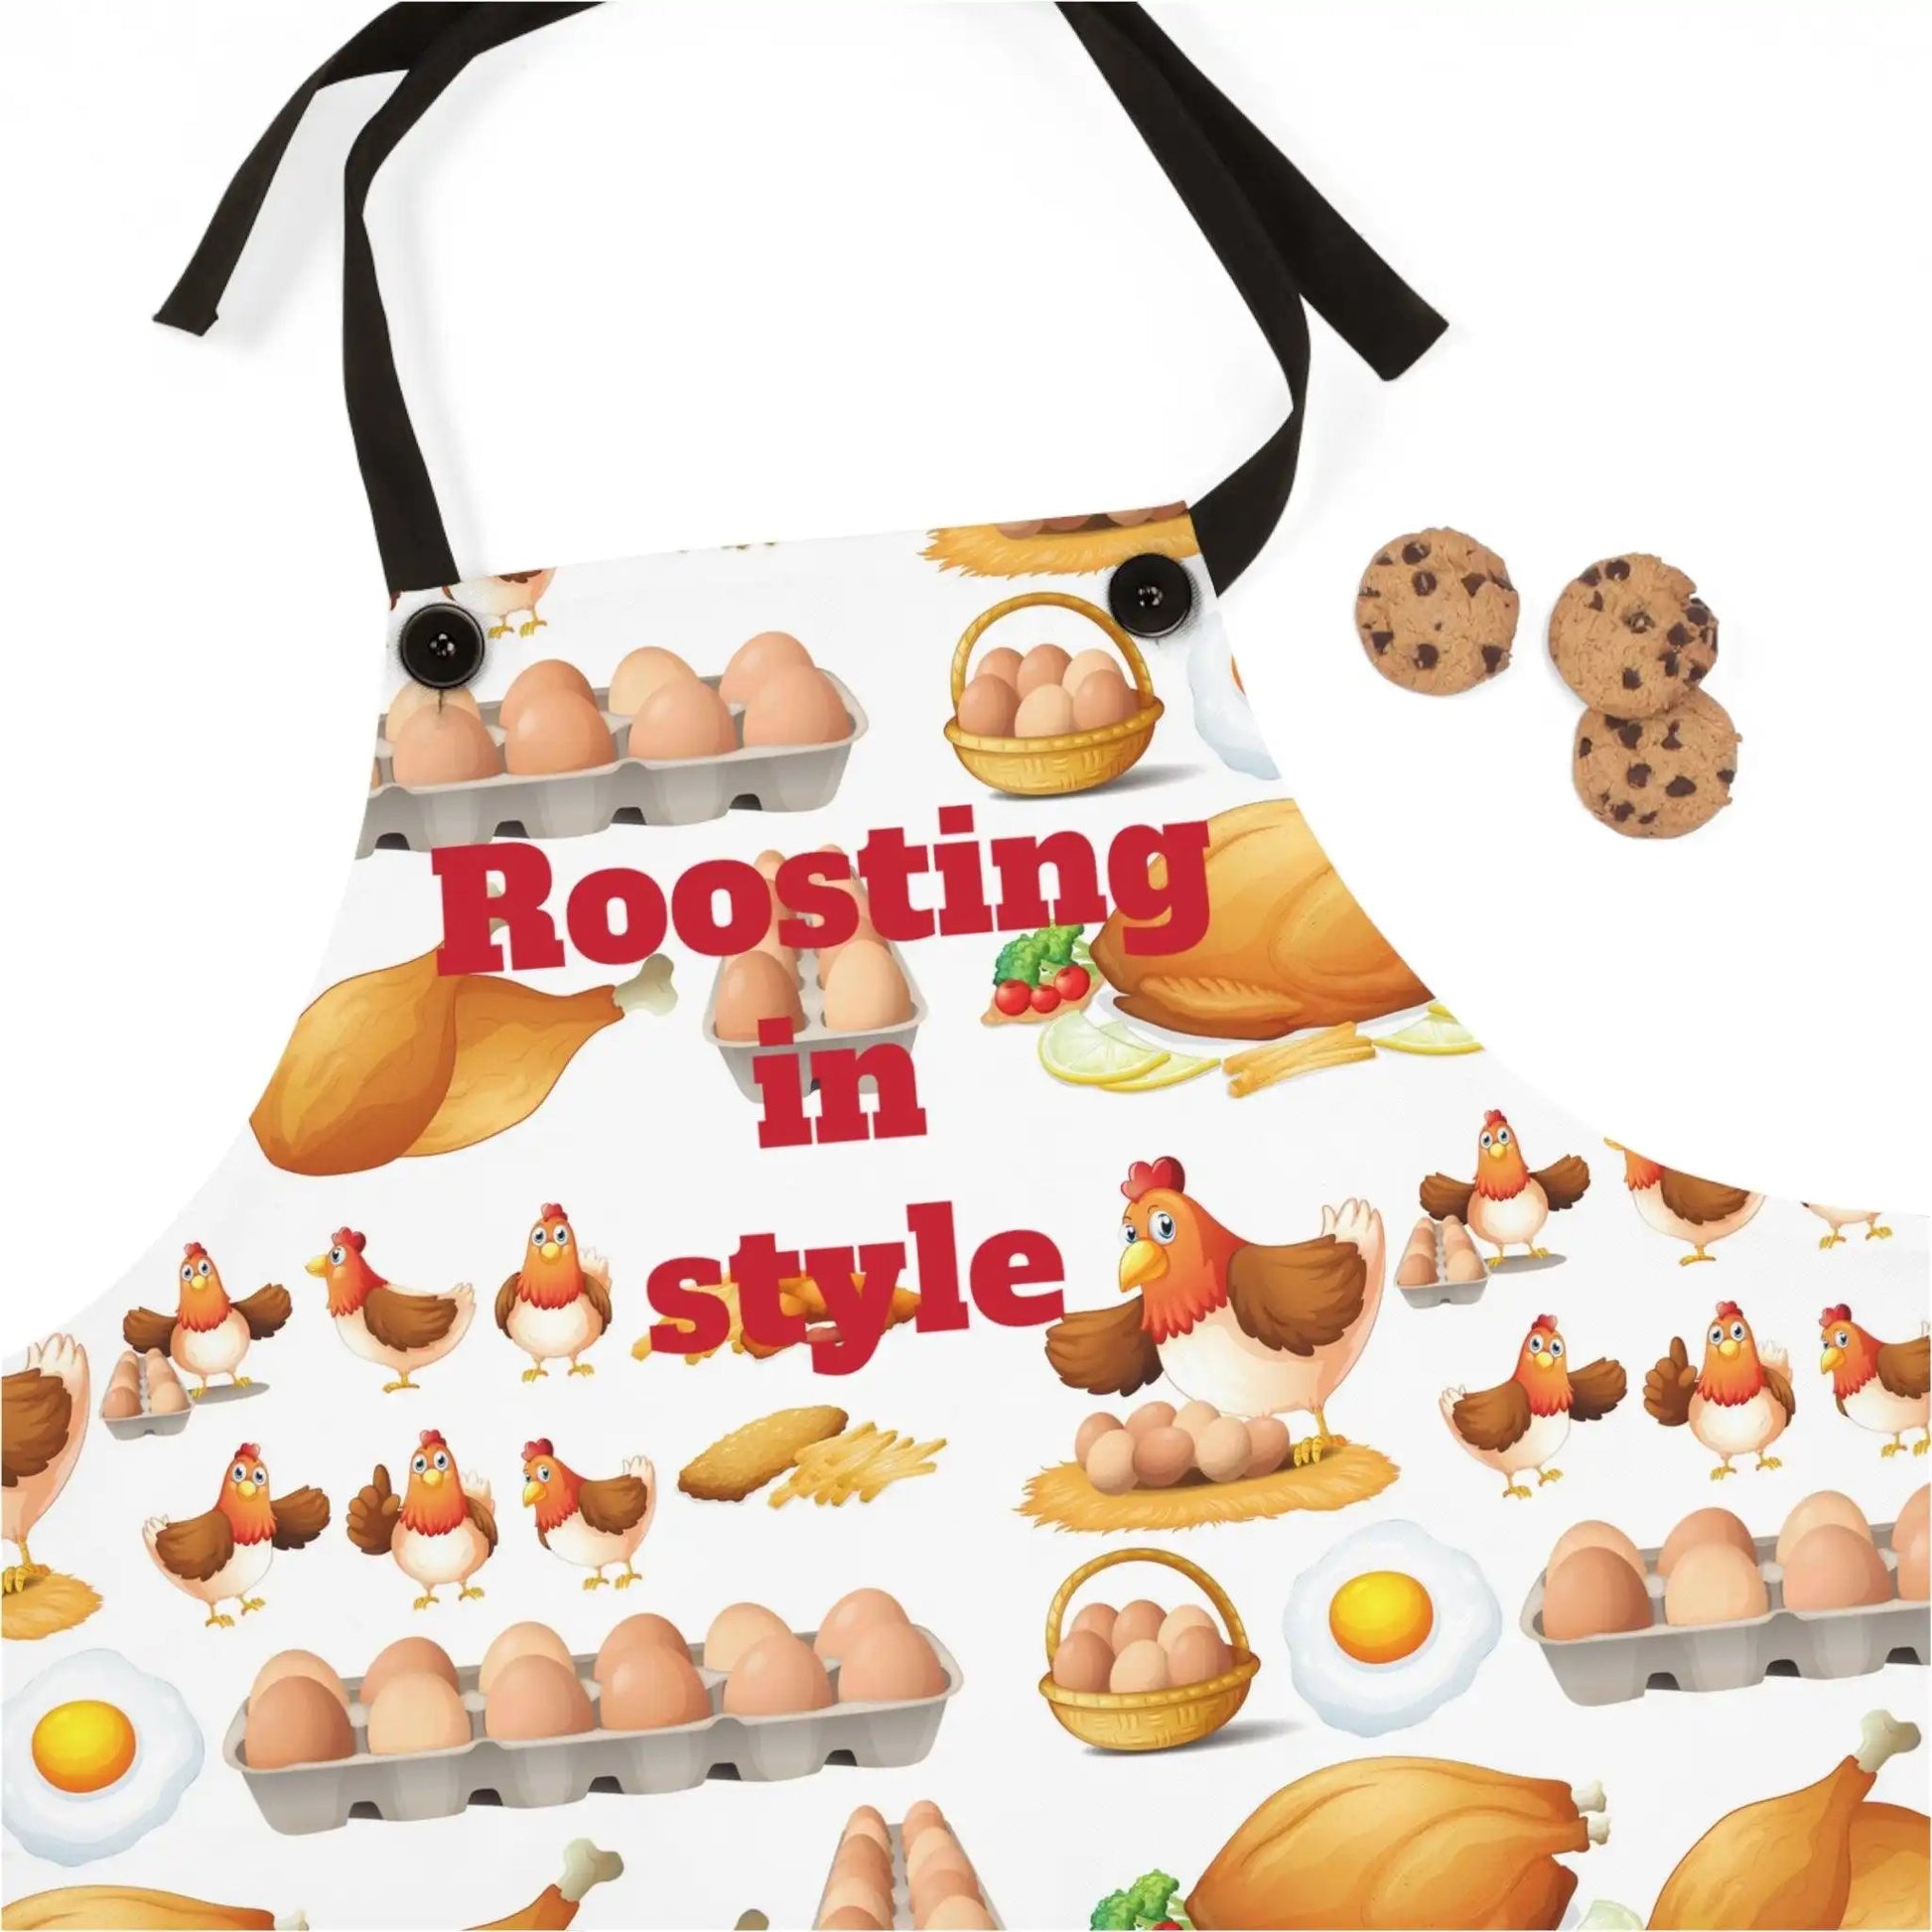 Roosting in Style Chicken Apron (AOP) - The Hufeisen-Ranch (WYO Wagyu)